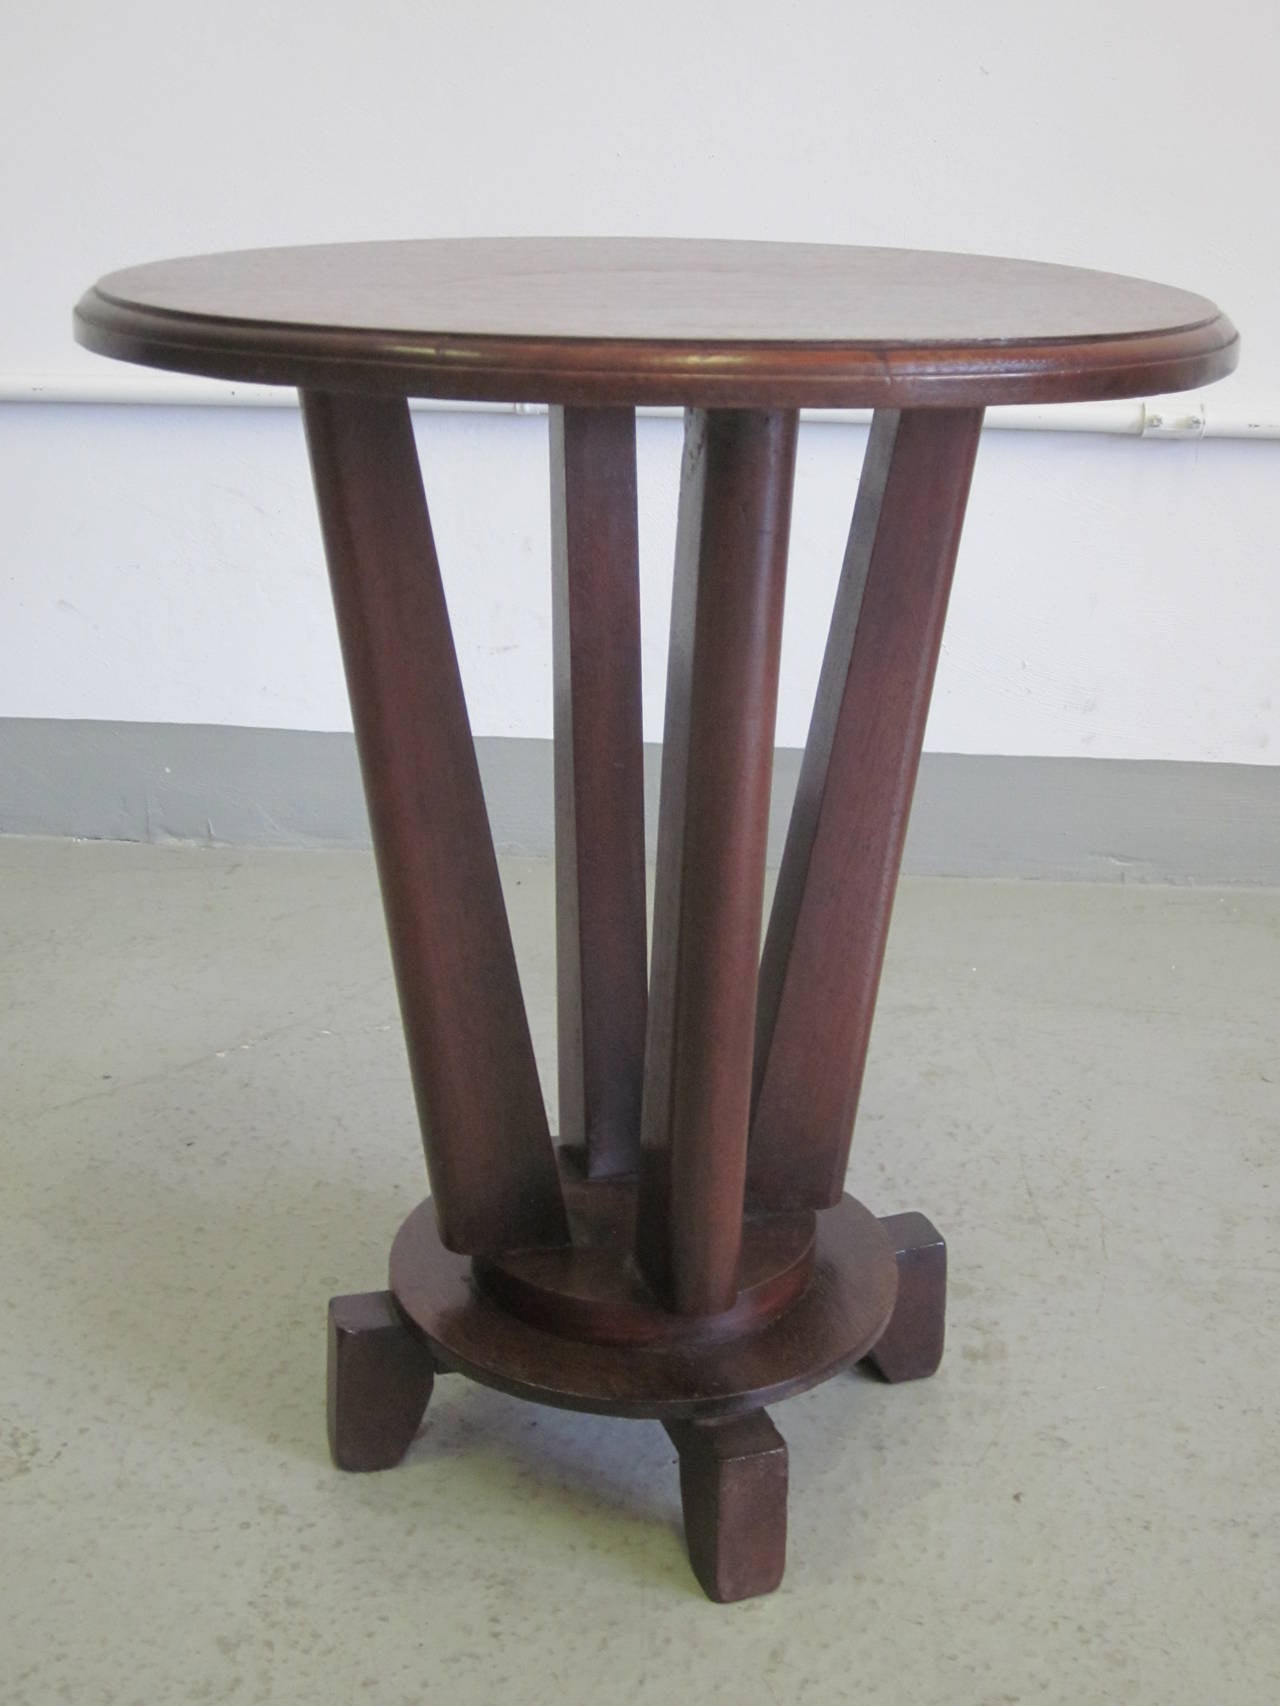 An elegant French Colonial gueridon, coffee table or side table composed of four sculpted feet supporting a central round base from which four sabered legs emanate and support a round top with inset apron.